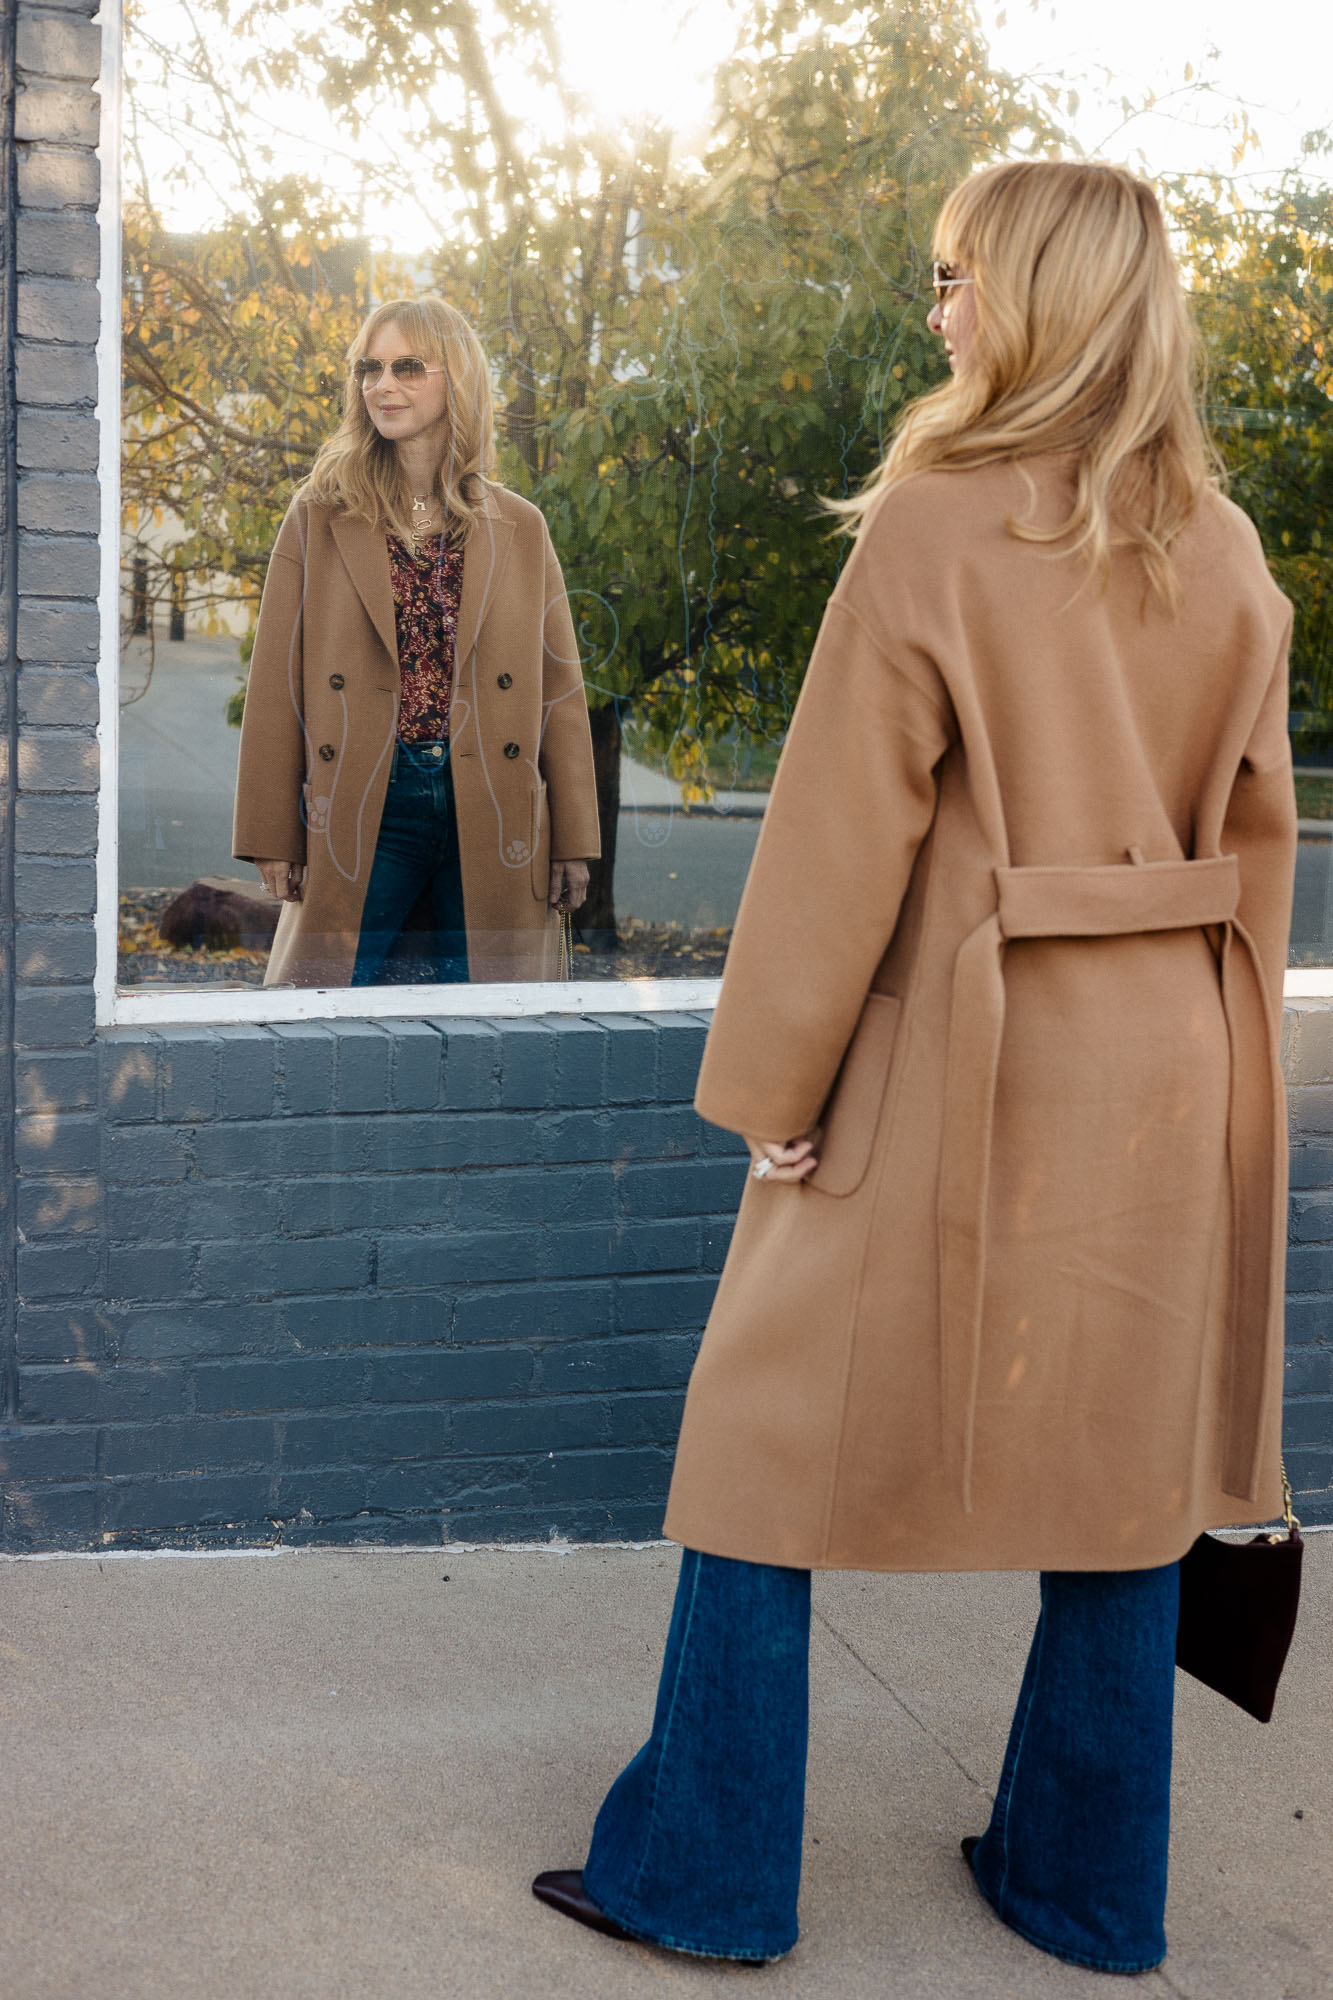 Wearing the Anine Bing Dylan coat in camel over Mother flare jeans.